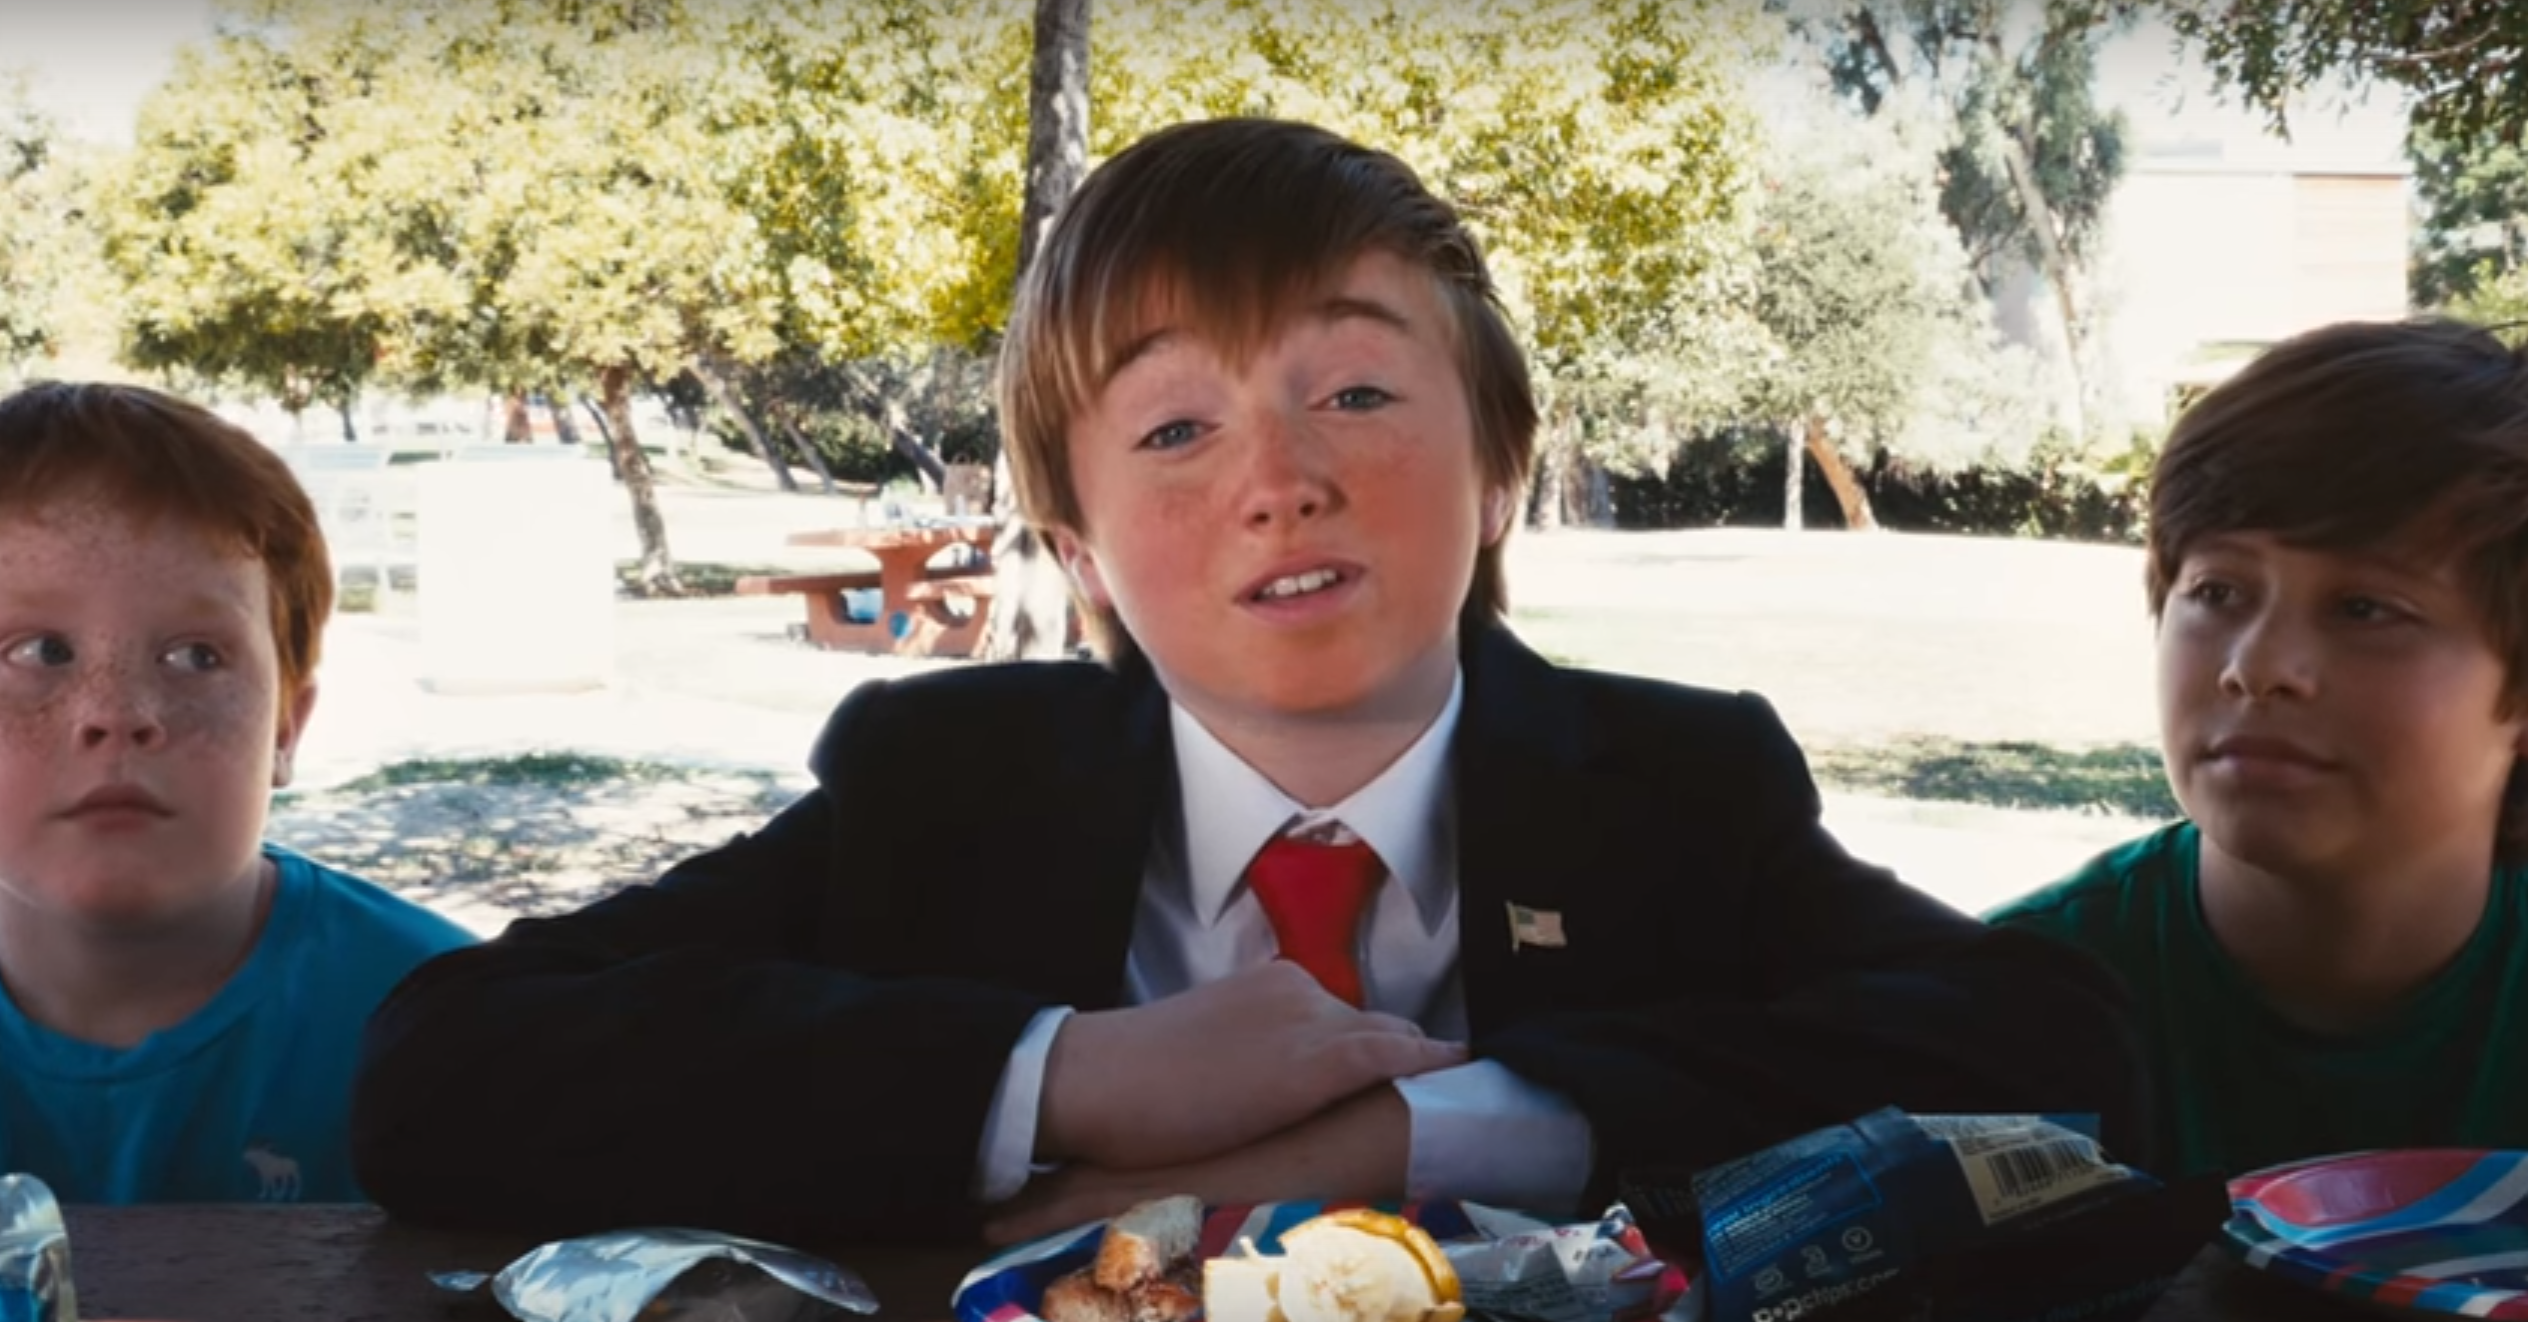 Trump Kid argues his policies over peanut butter and jelly sandwiches. 